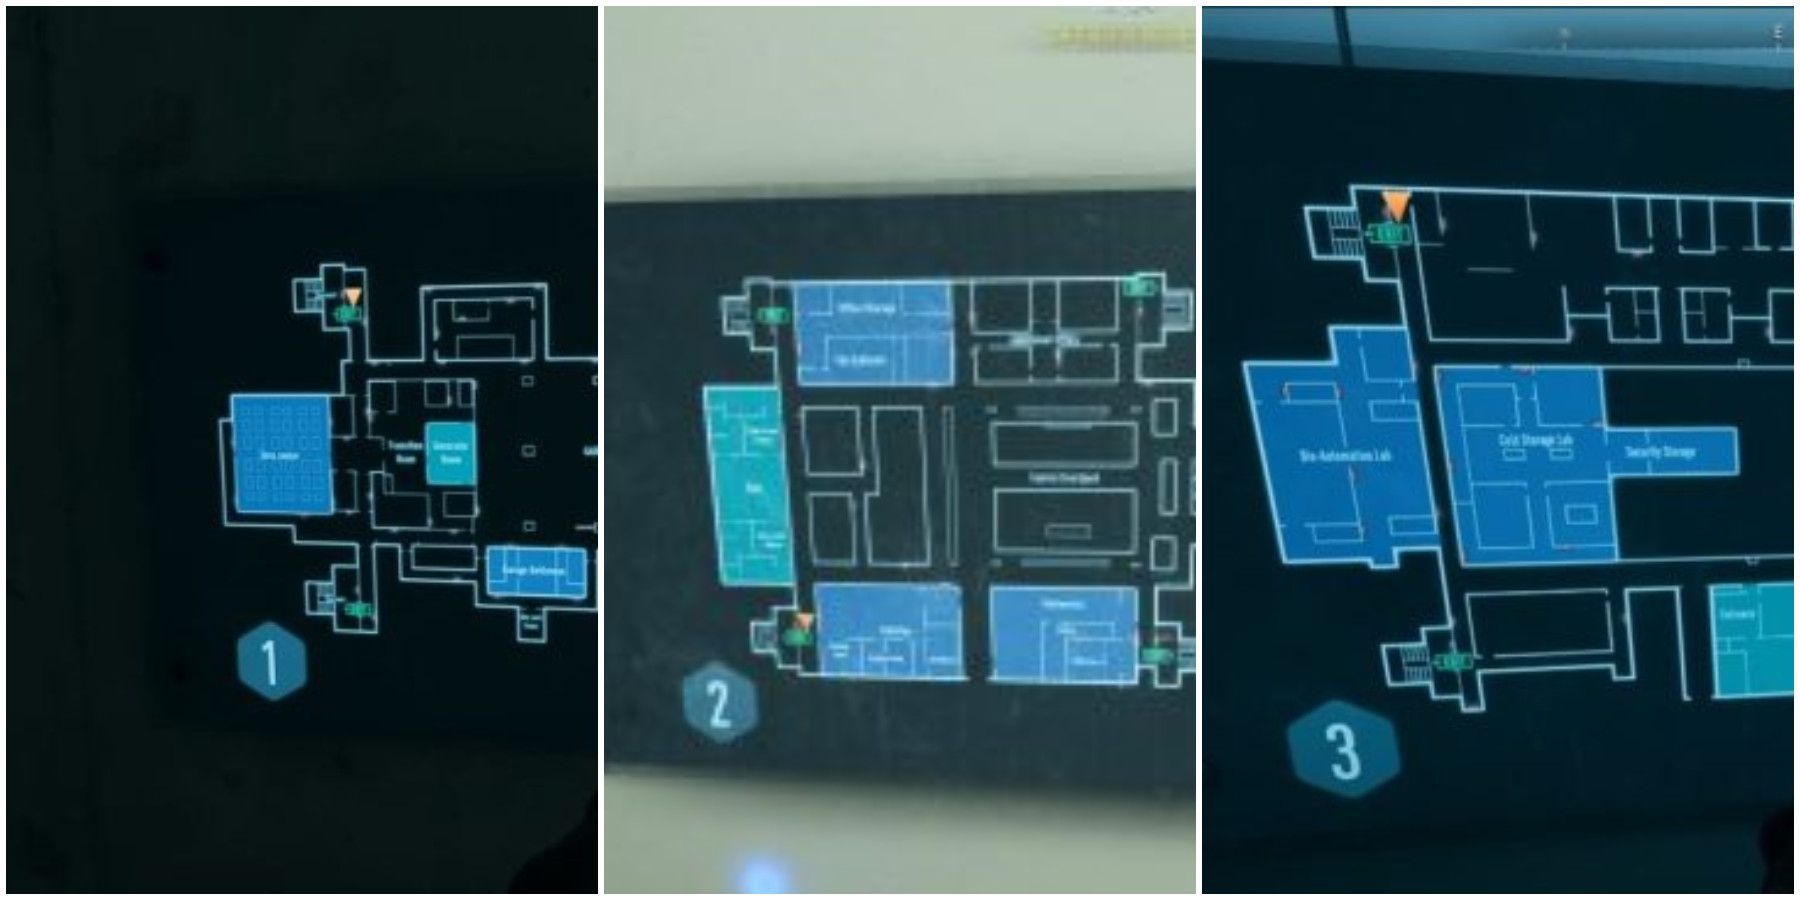 Call of Duty DMZ Building 21 Map Layout-1